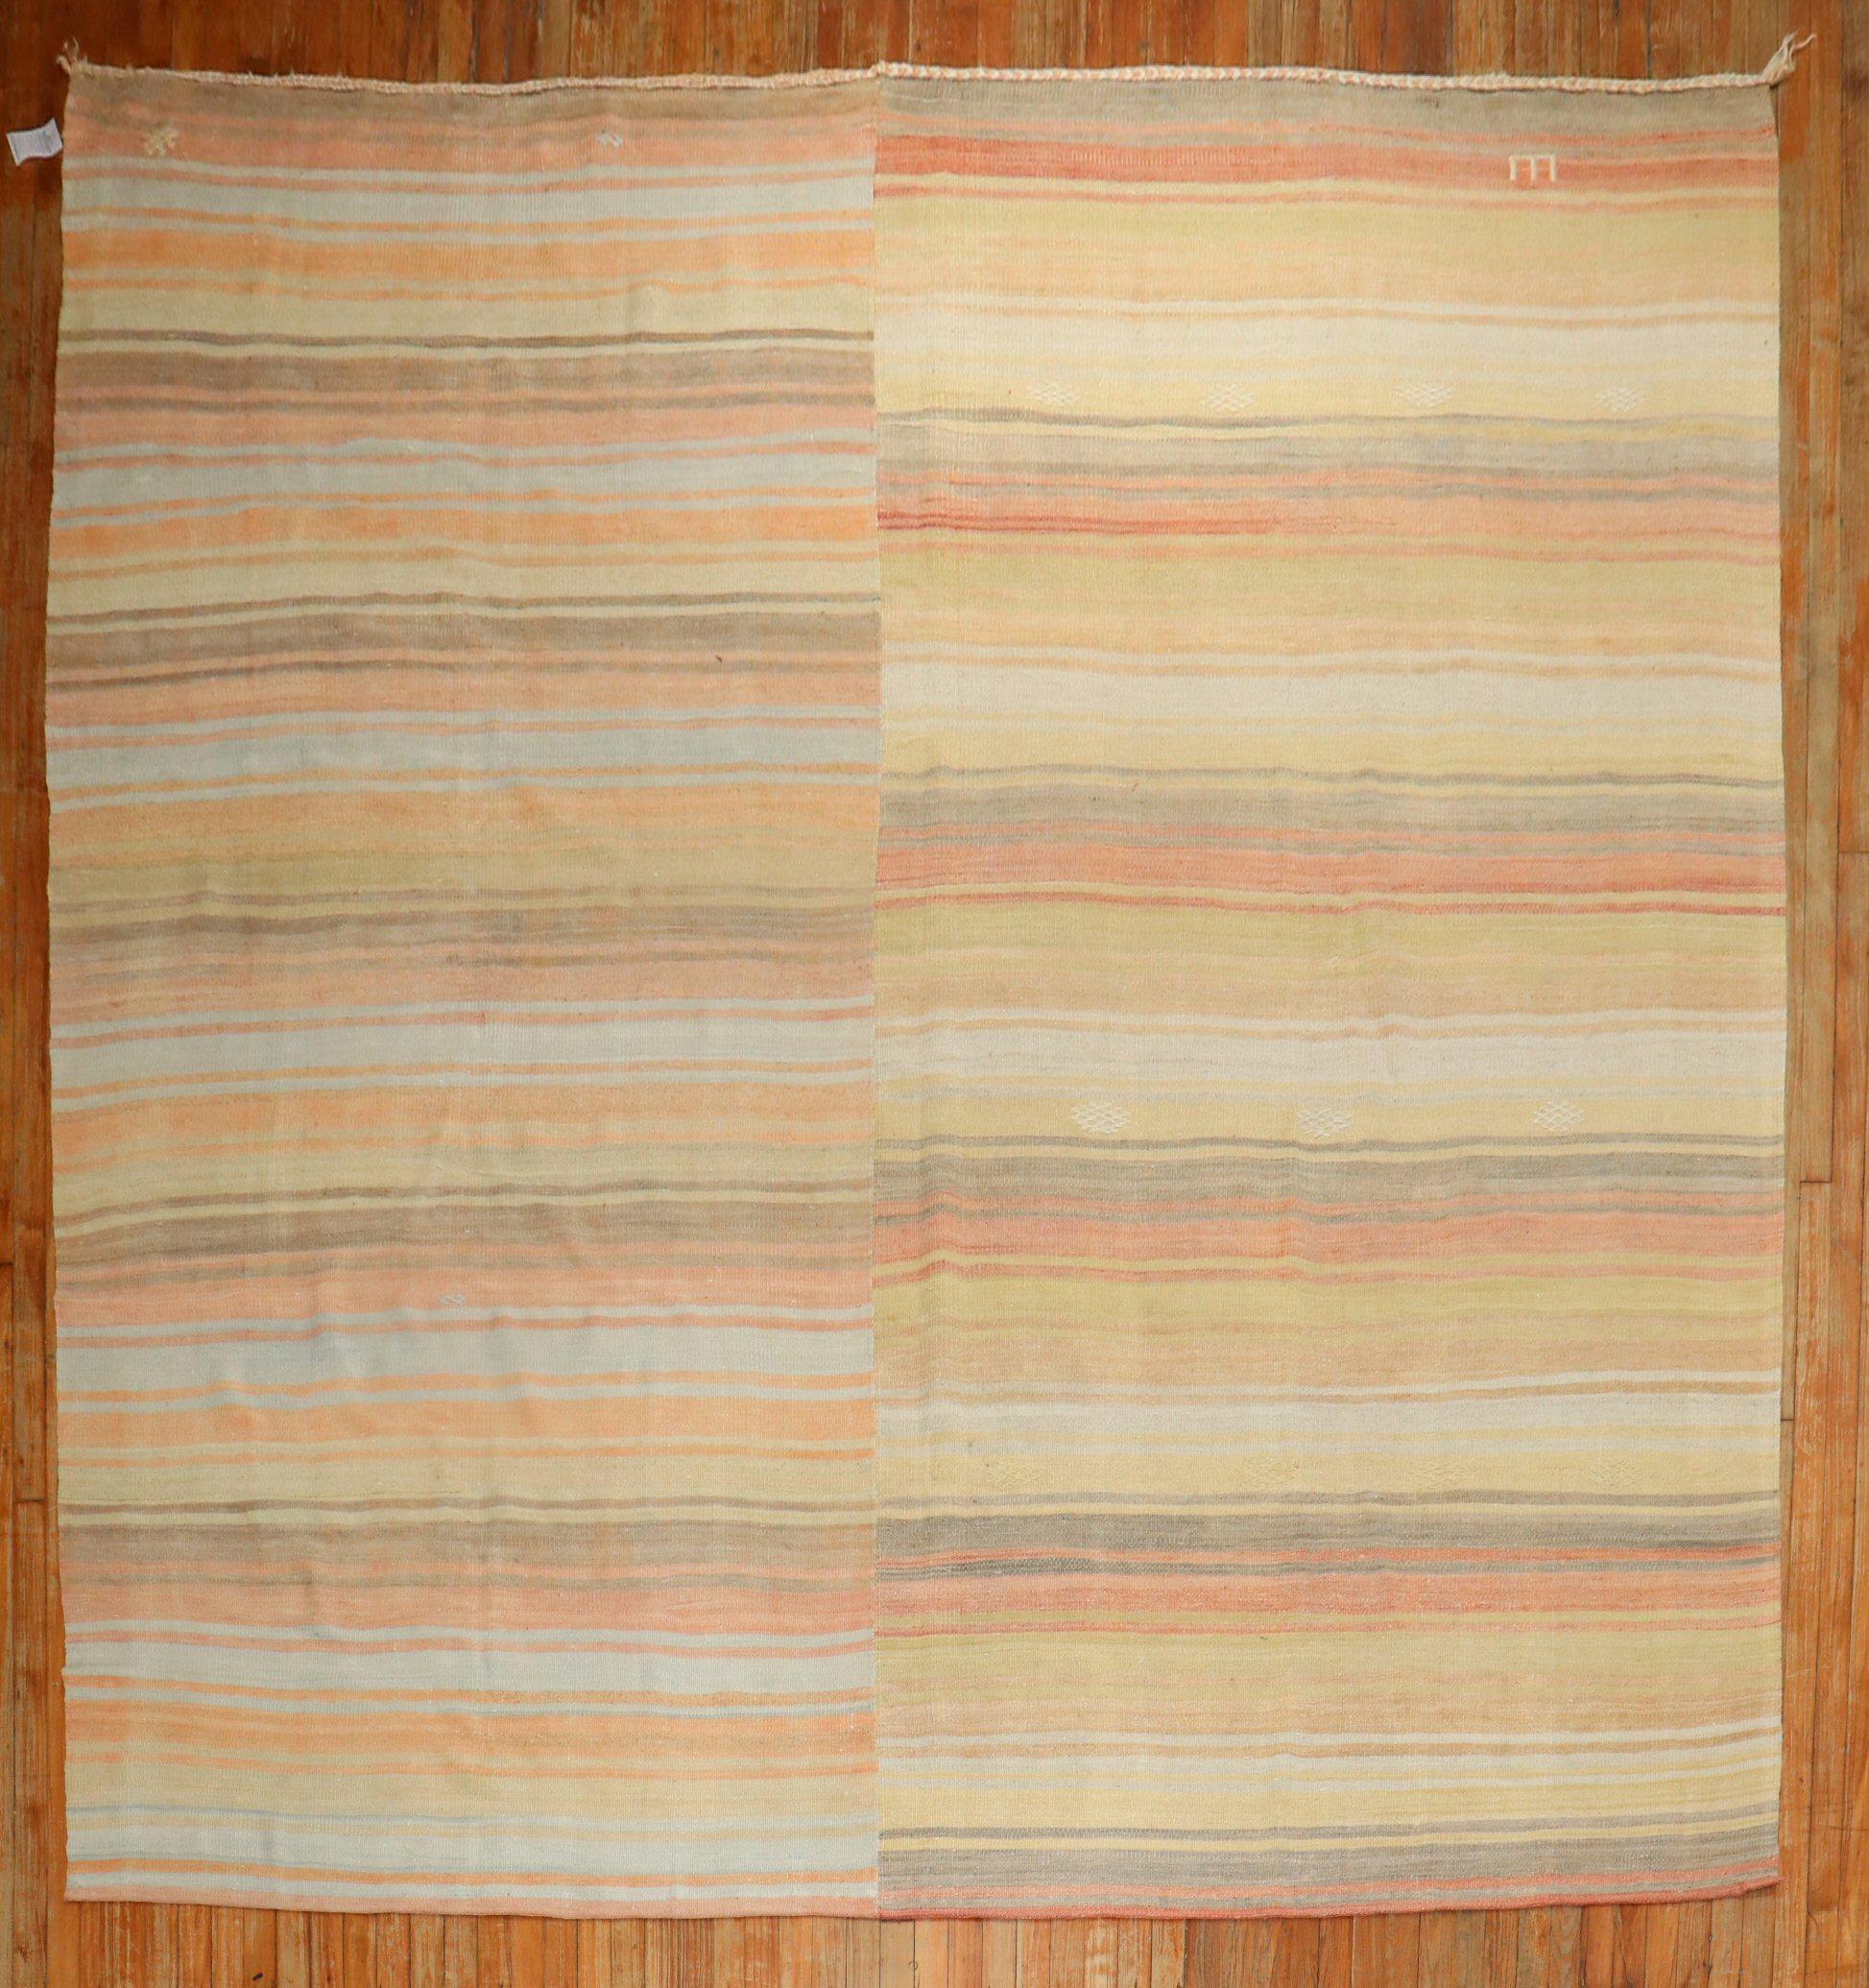 Room square size Turkish Kilim from the middle of the 20th century in warm colors

Measures: 9'10'' x 11'